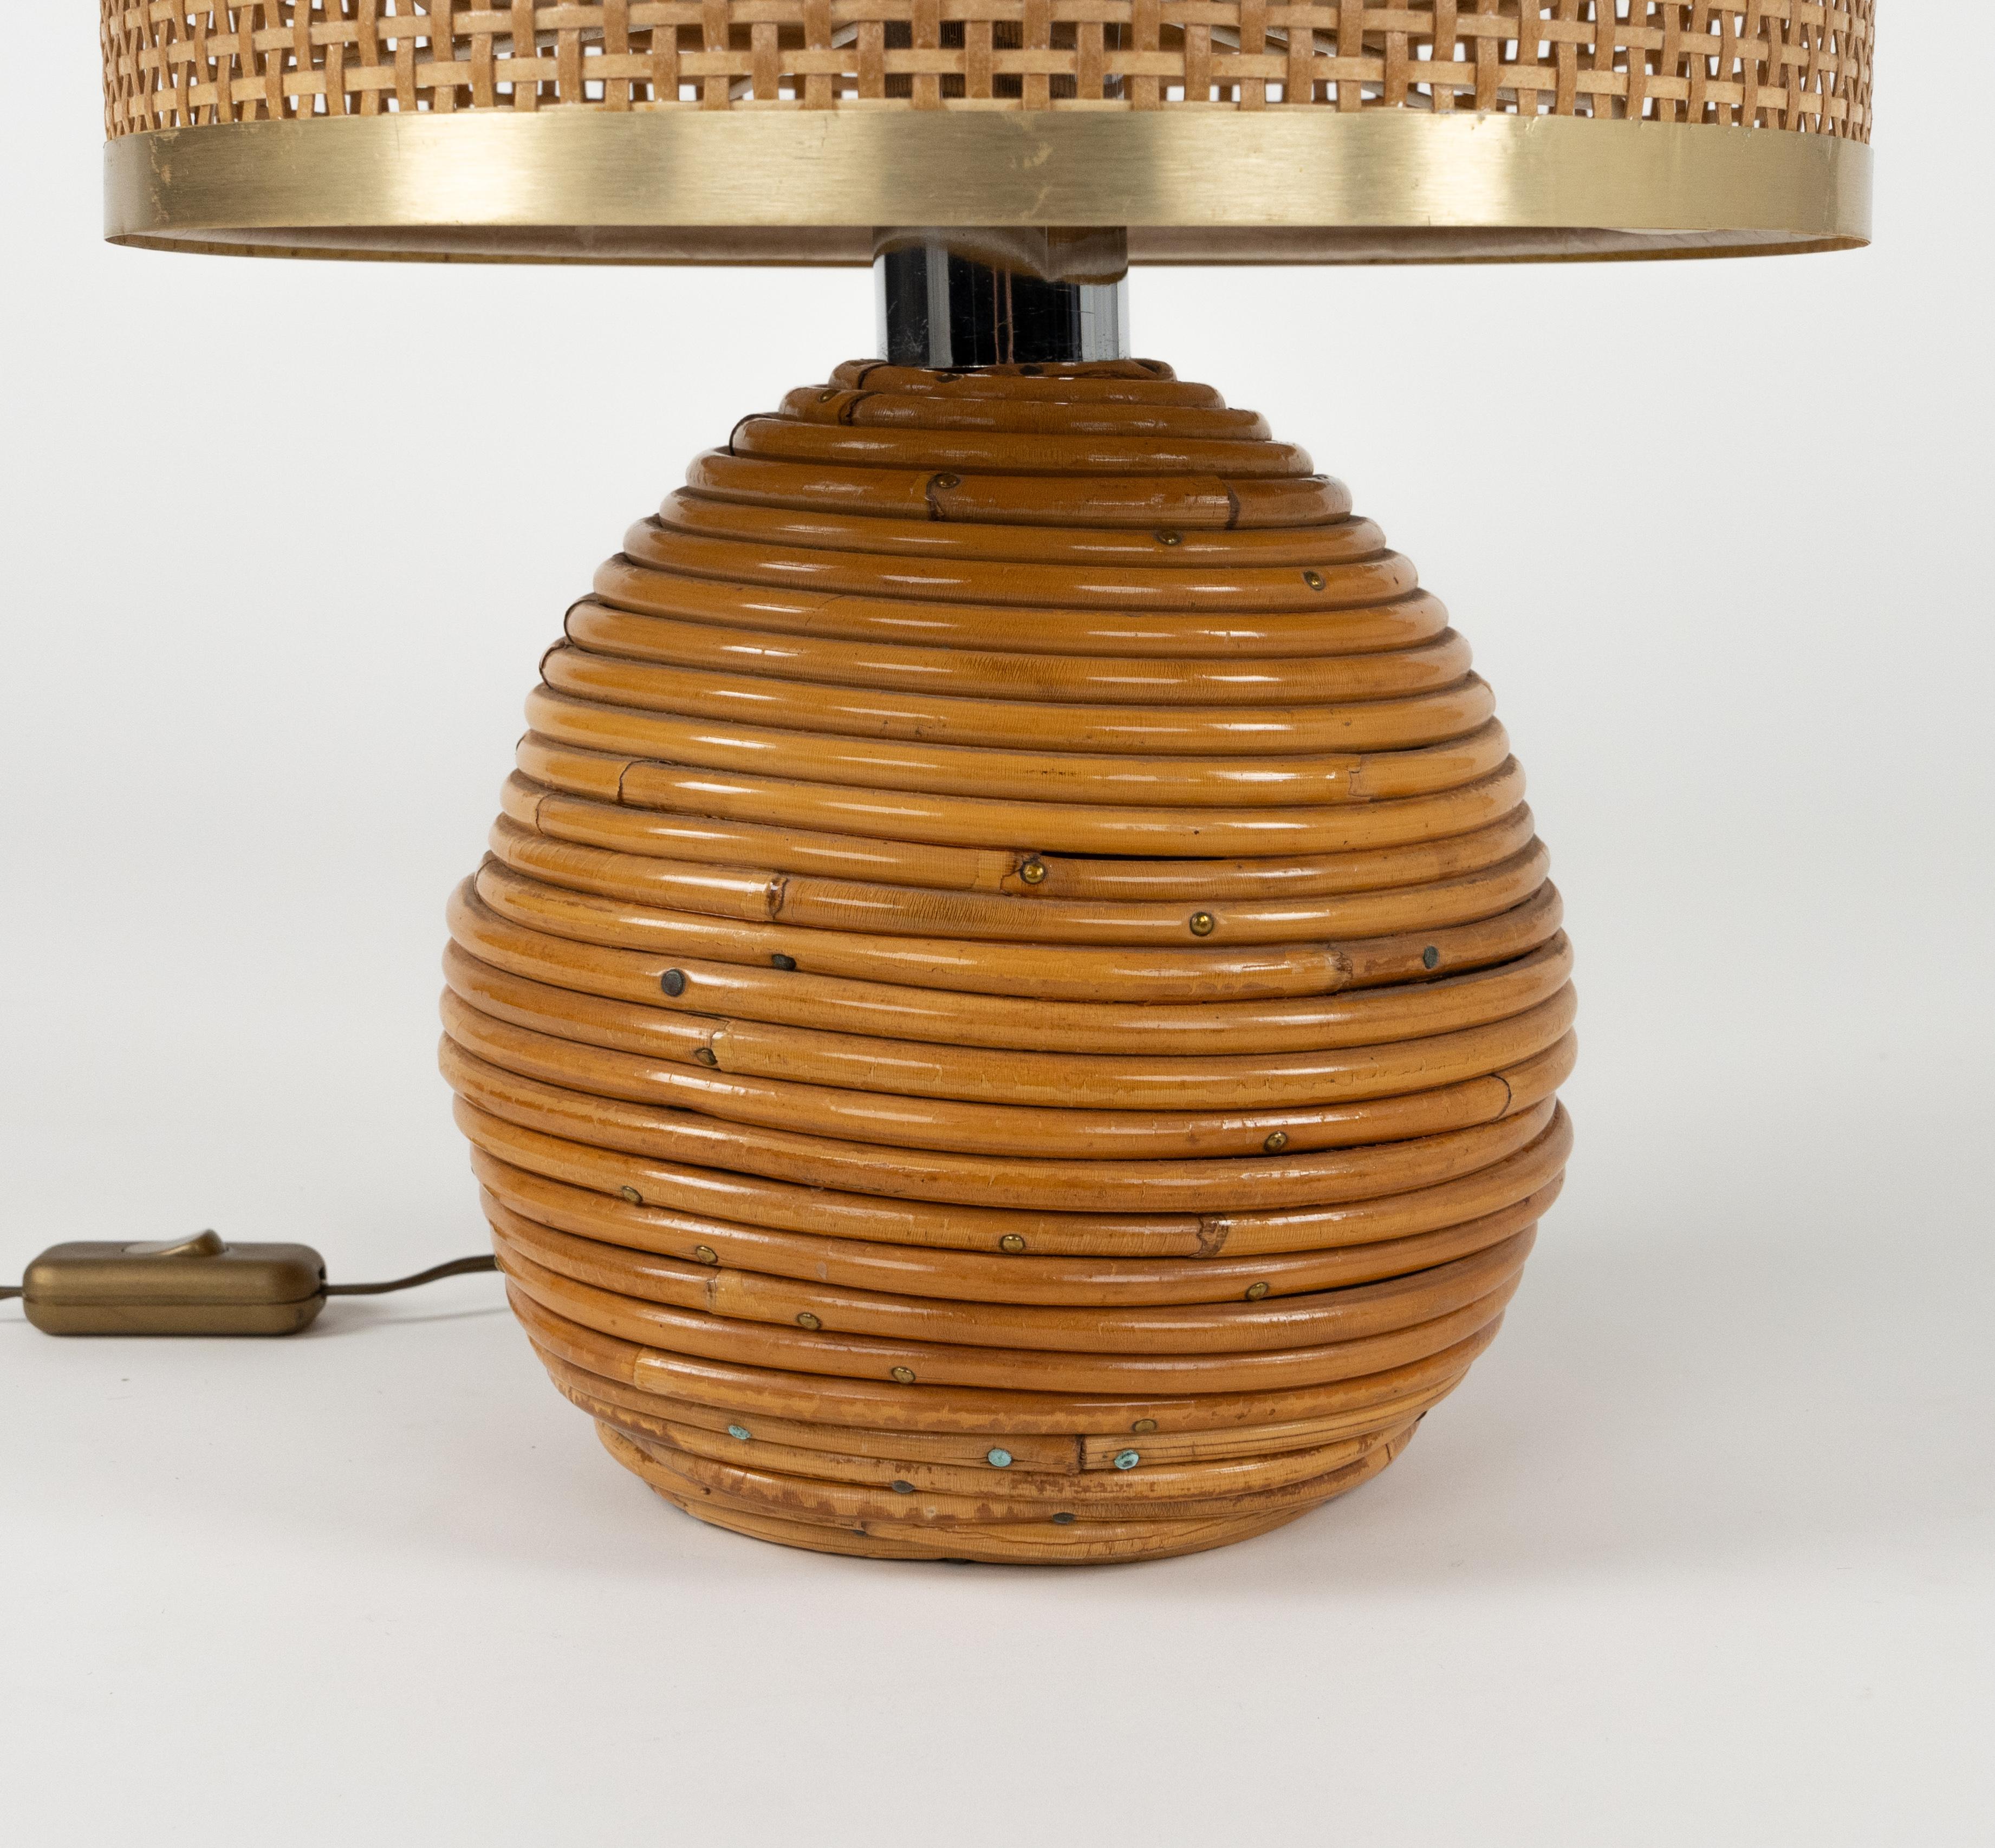 Late 20th Century Midcentury Rattan, Wicker and Chrome Table Lamp by Vivai Del Sud, Italy 1970s